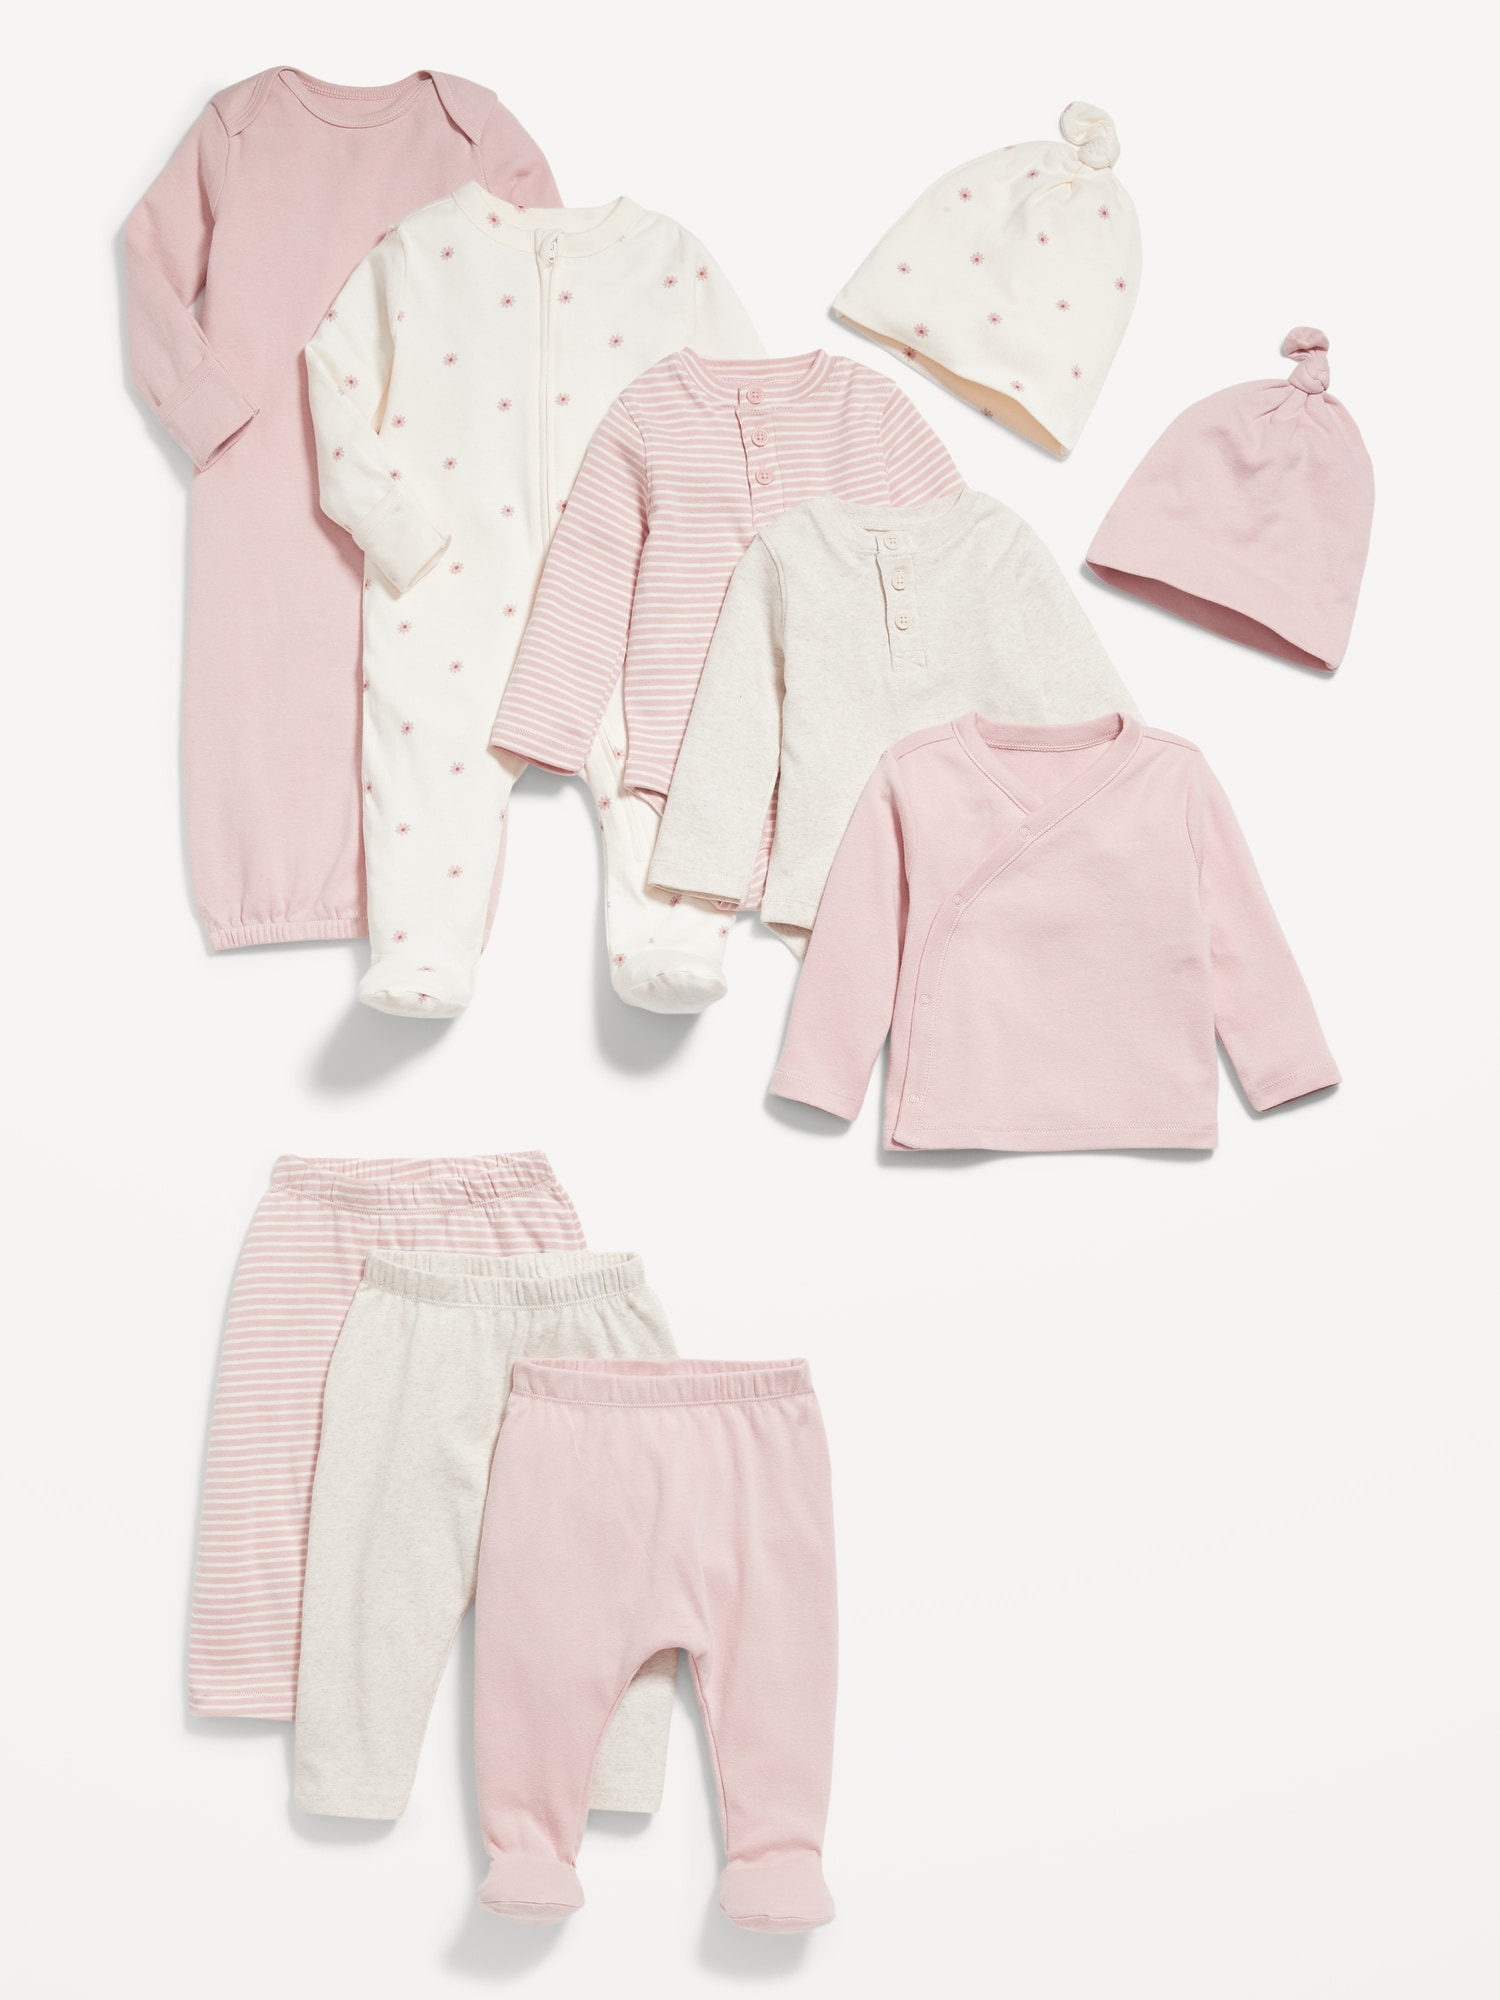 Oldnavy Unisex Layette Essentials 10-Pack for Baby Hot Deal